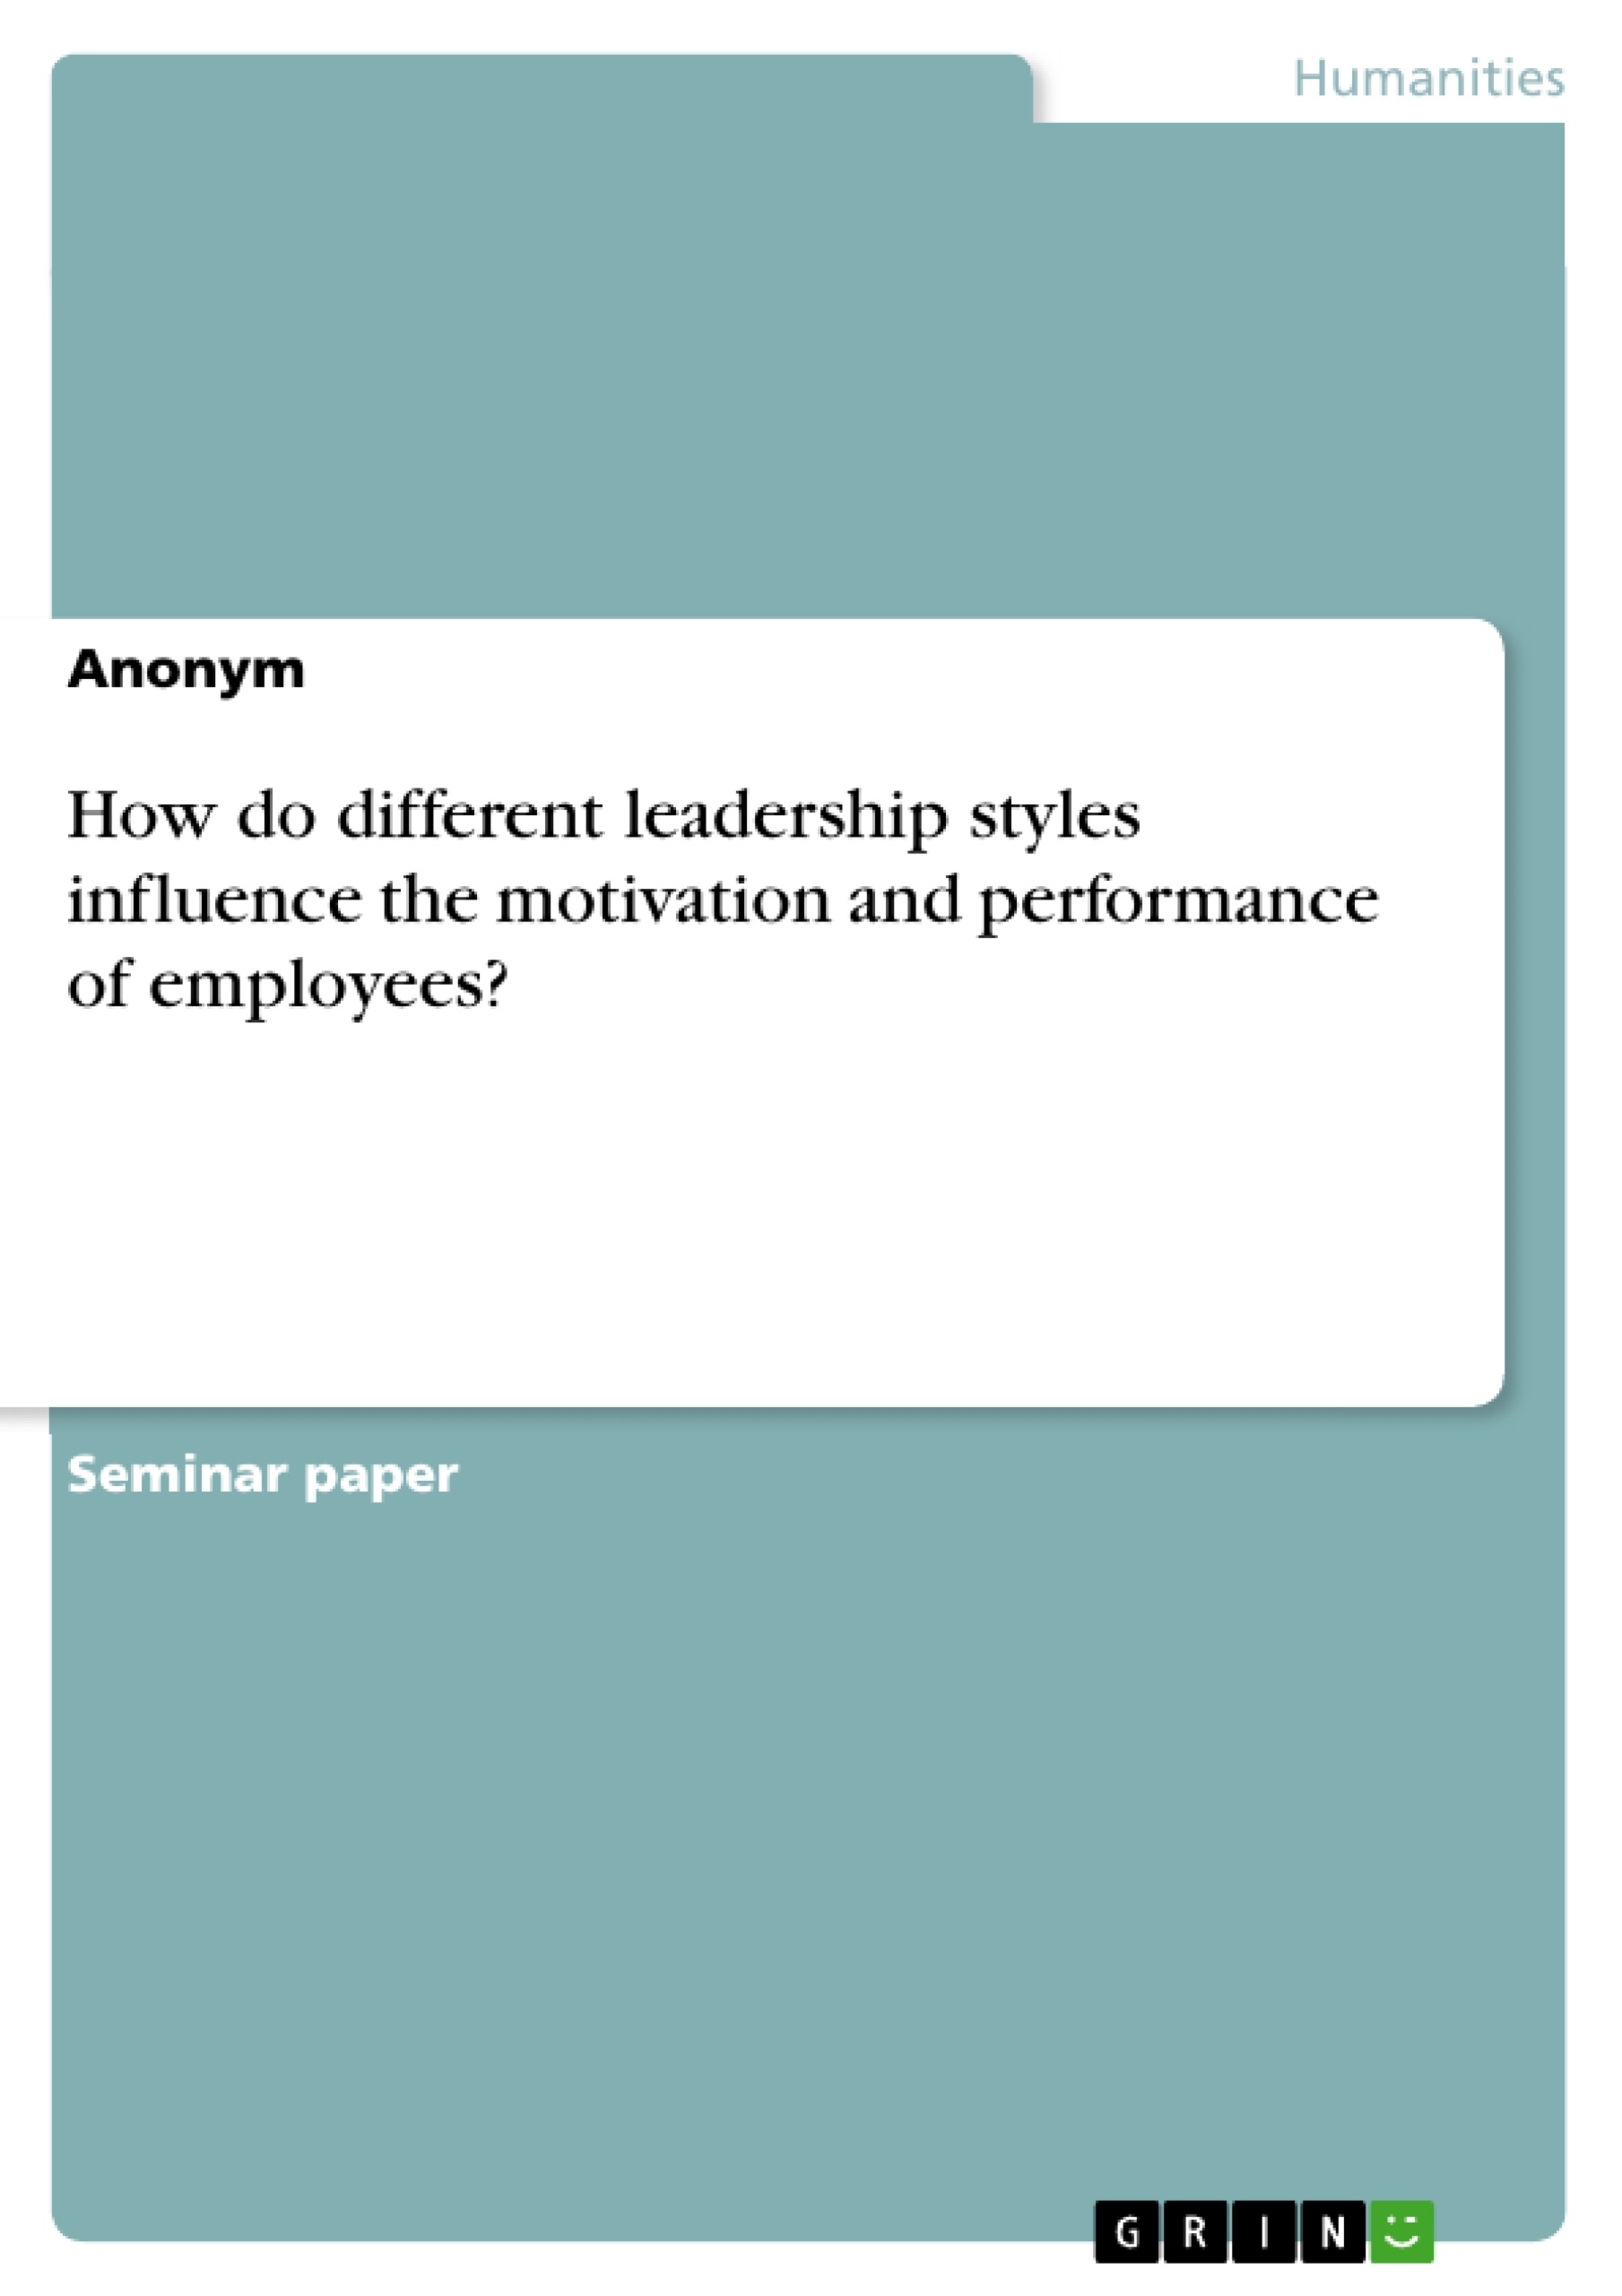 Title: How do different leadership styles influence the motivation and performance of employees?